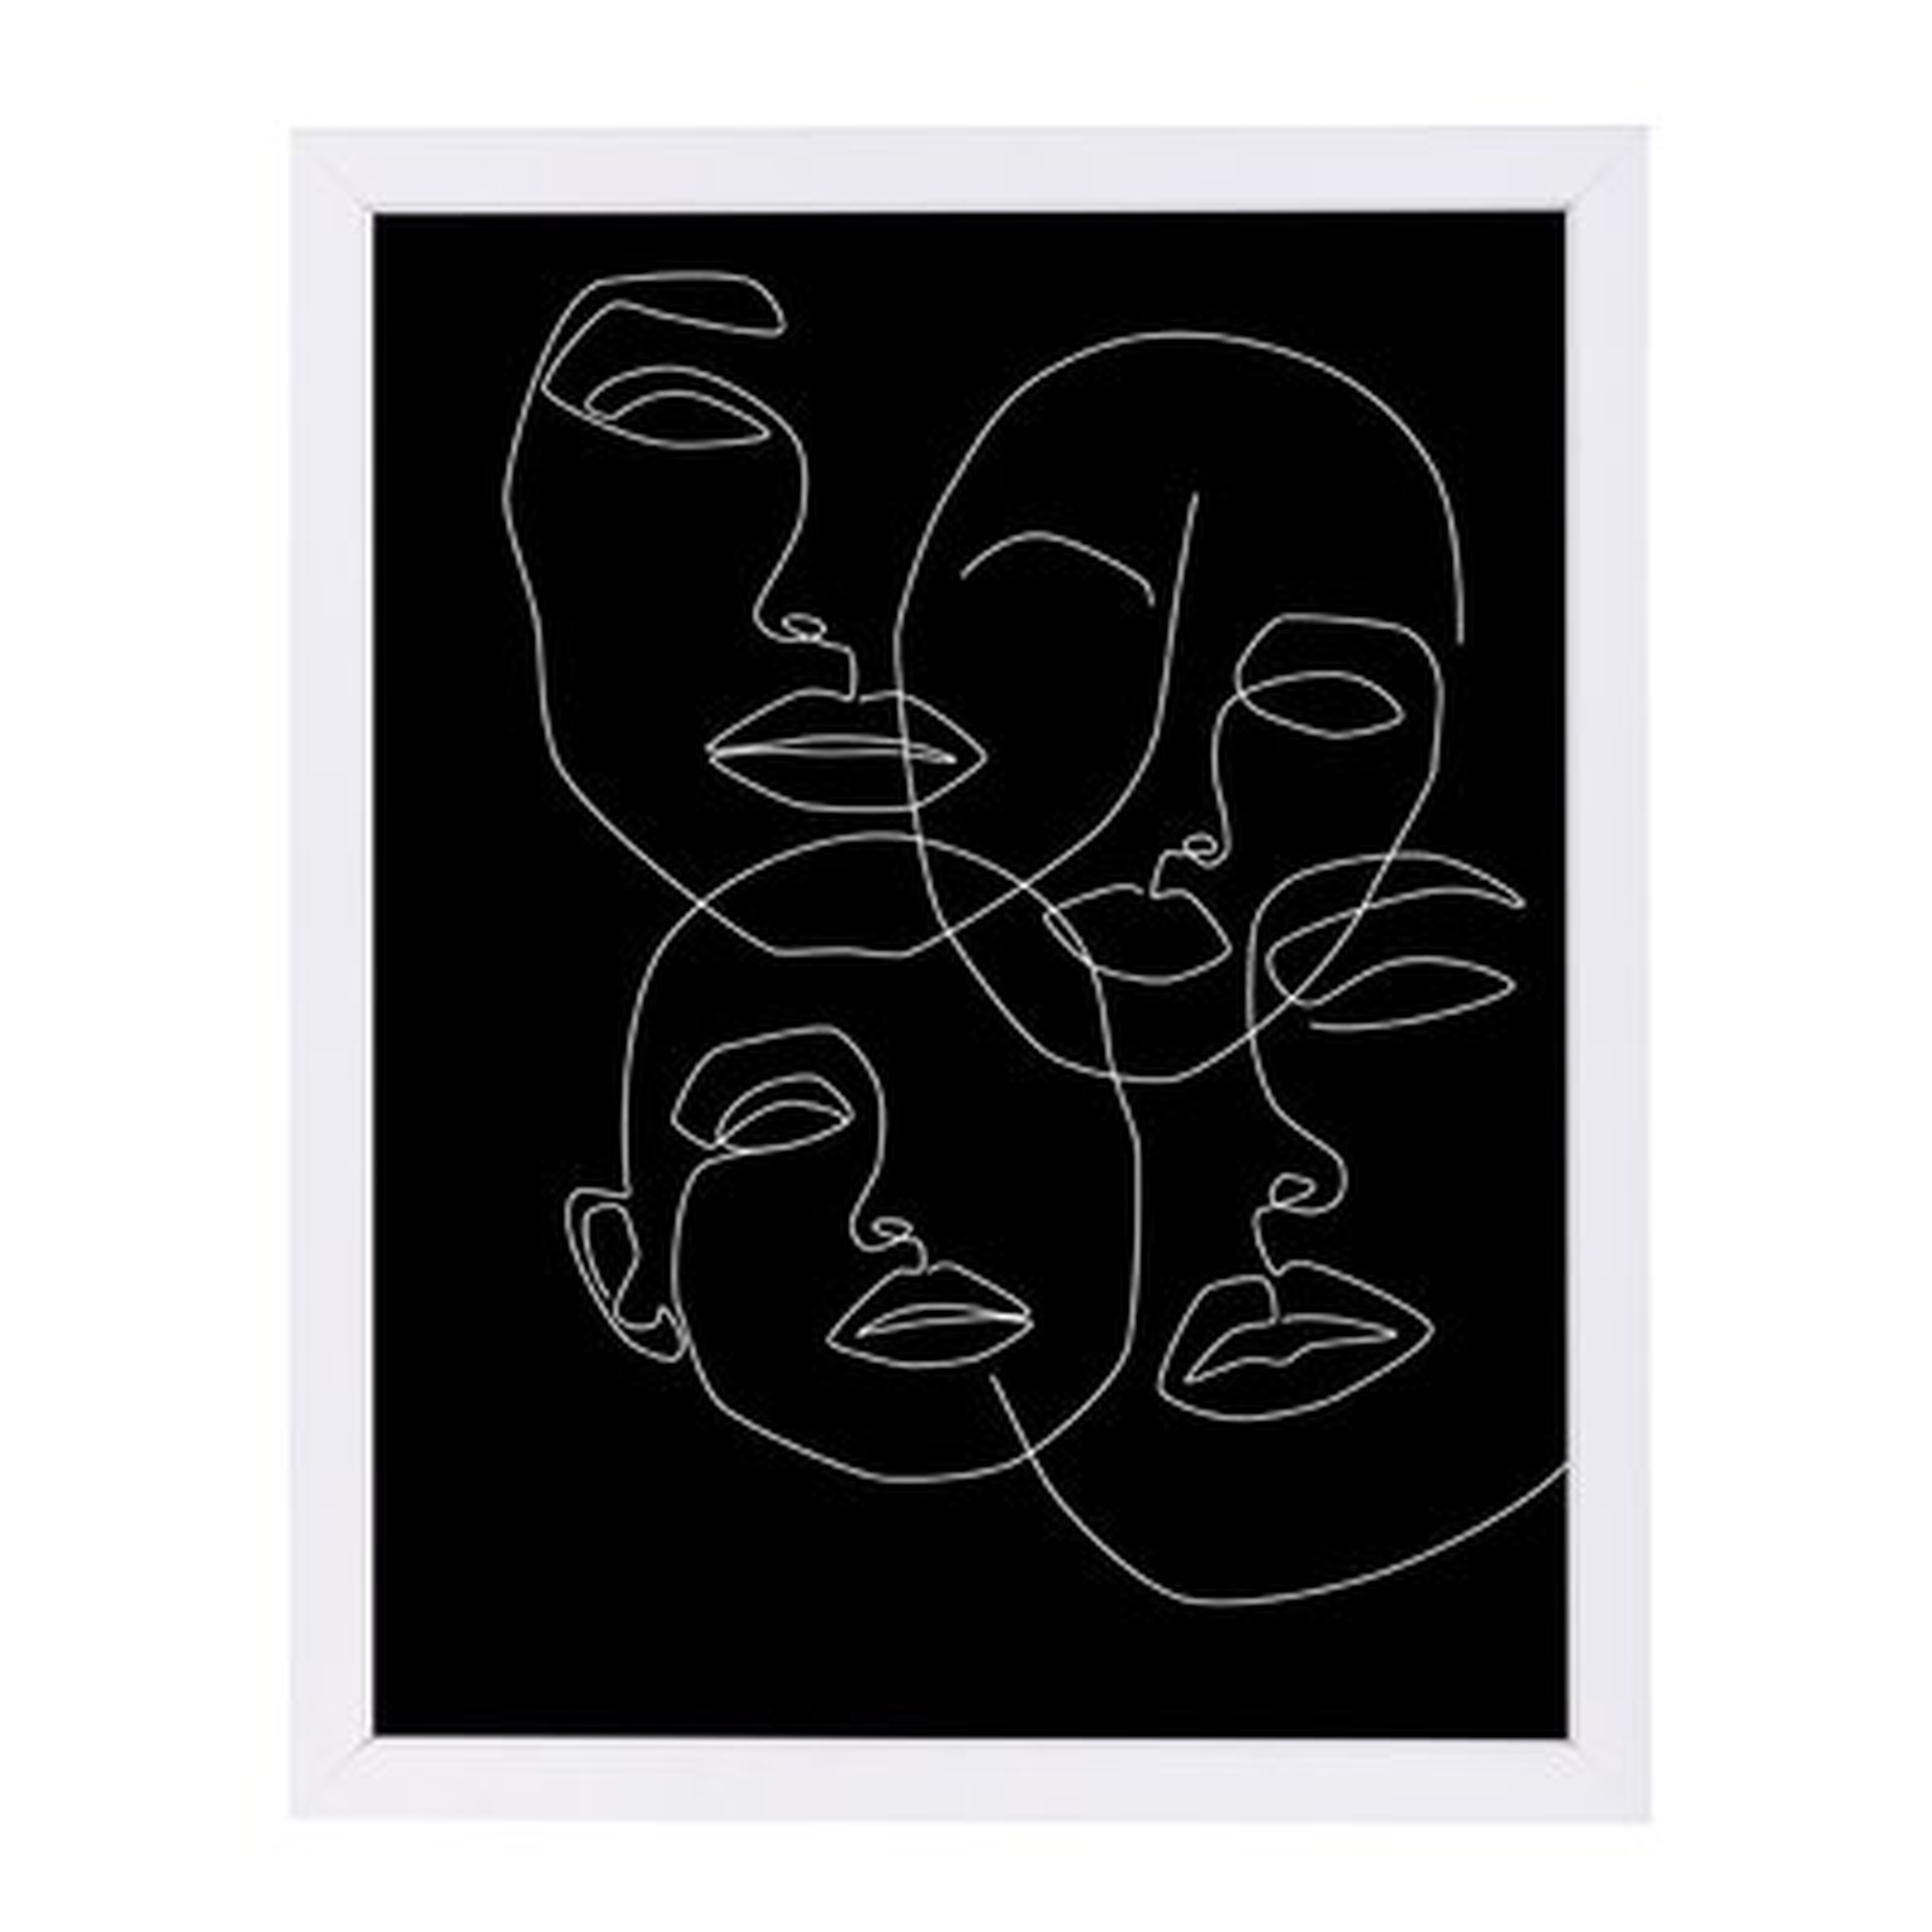 Faces by Explicit Design - Picture Frame Print on Canvas - AllModern